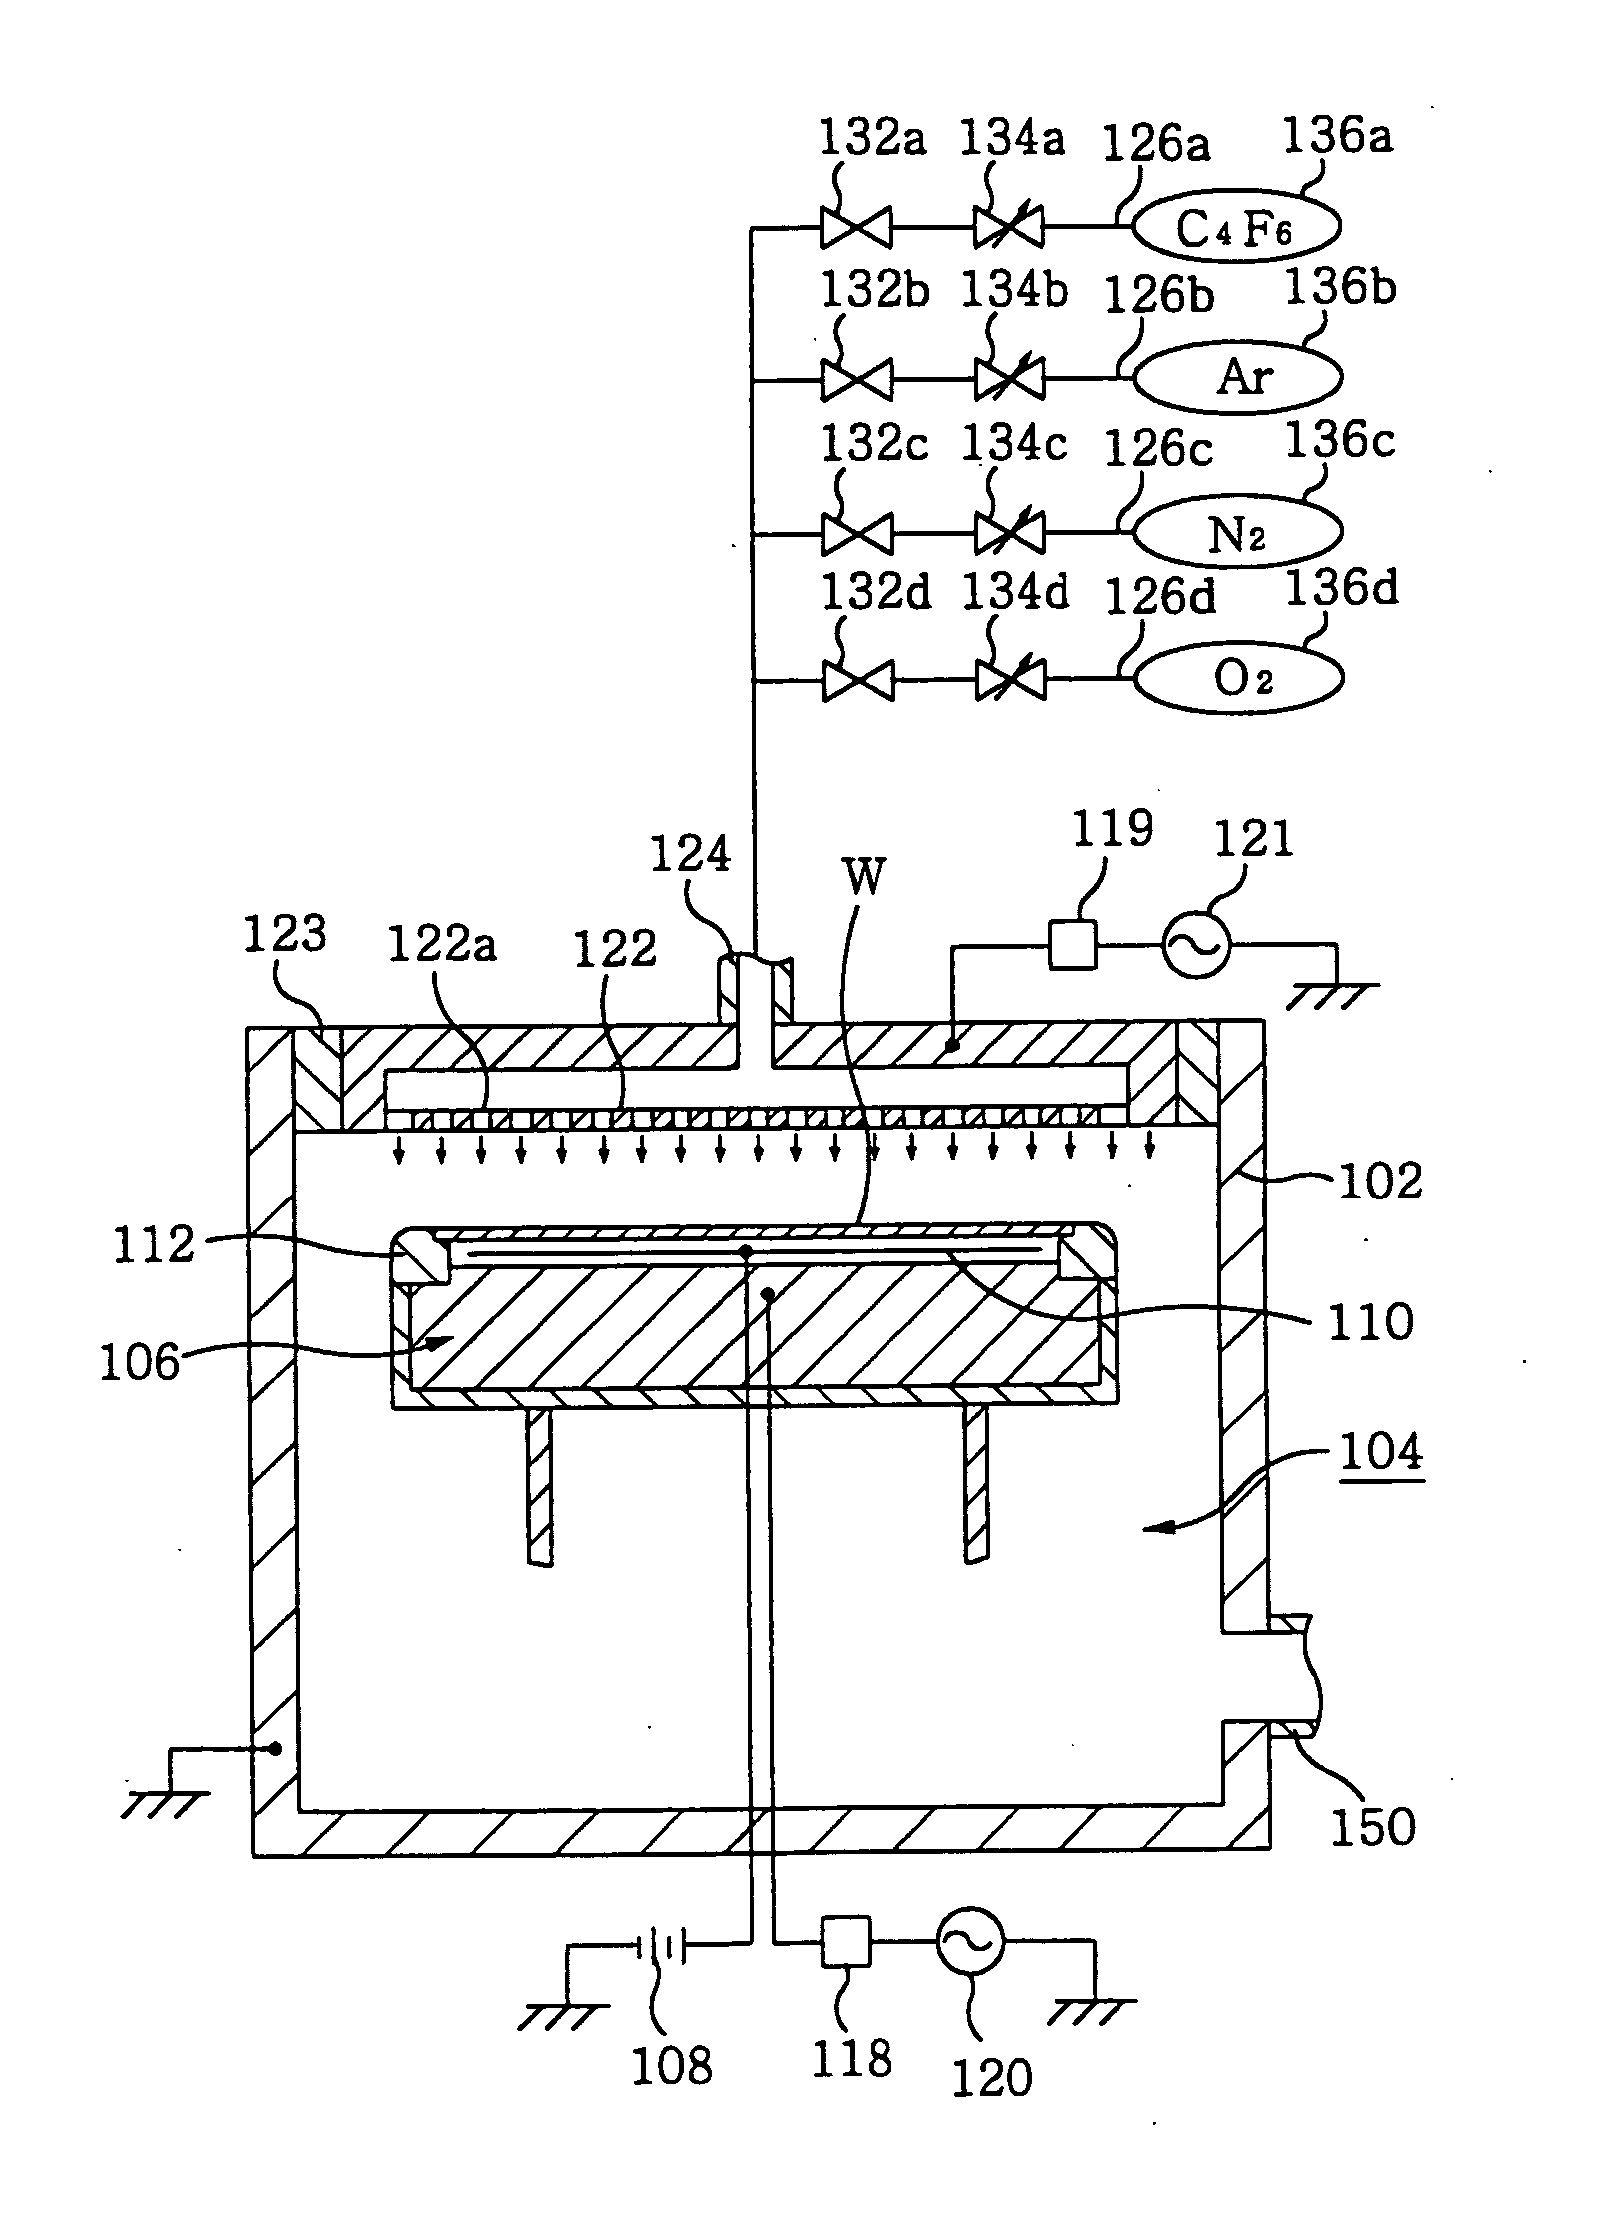 Method of etching and etching apparatus